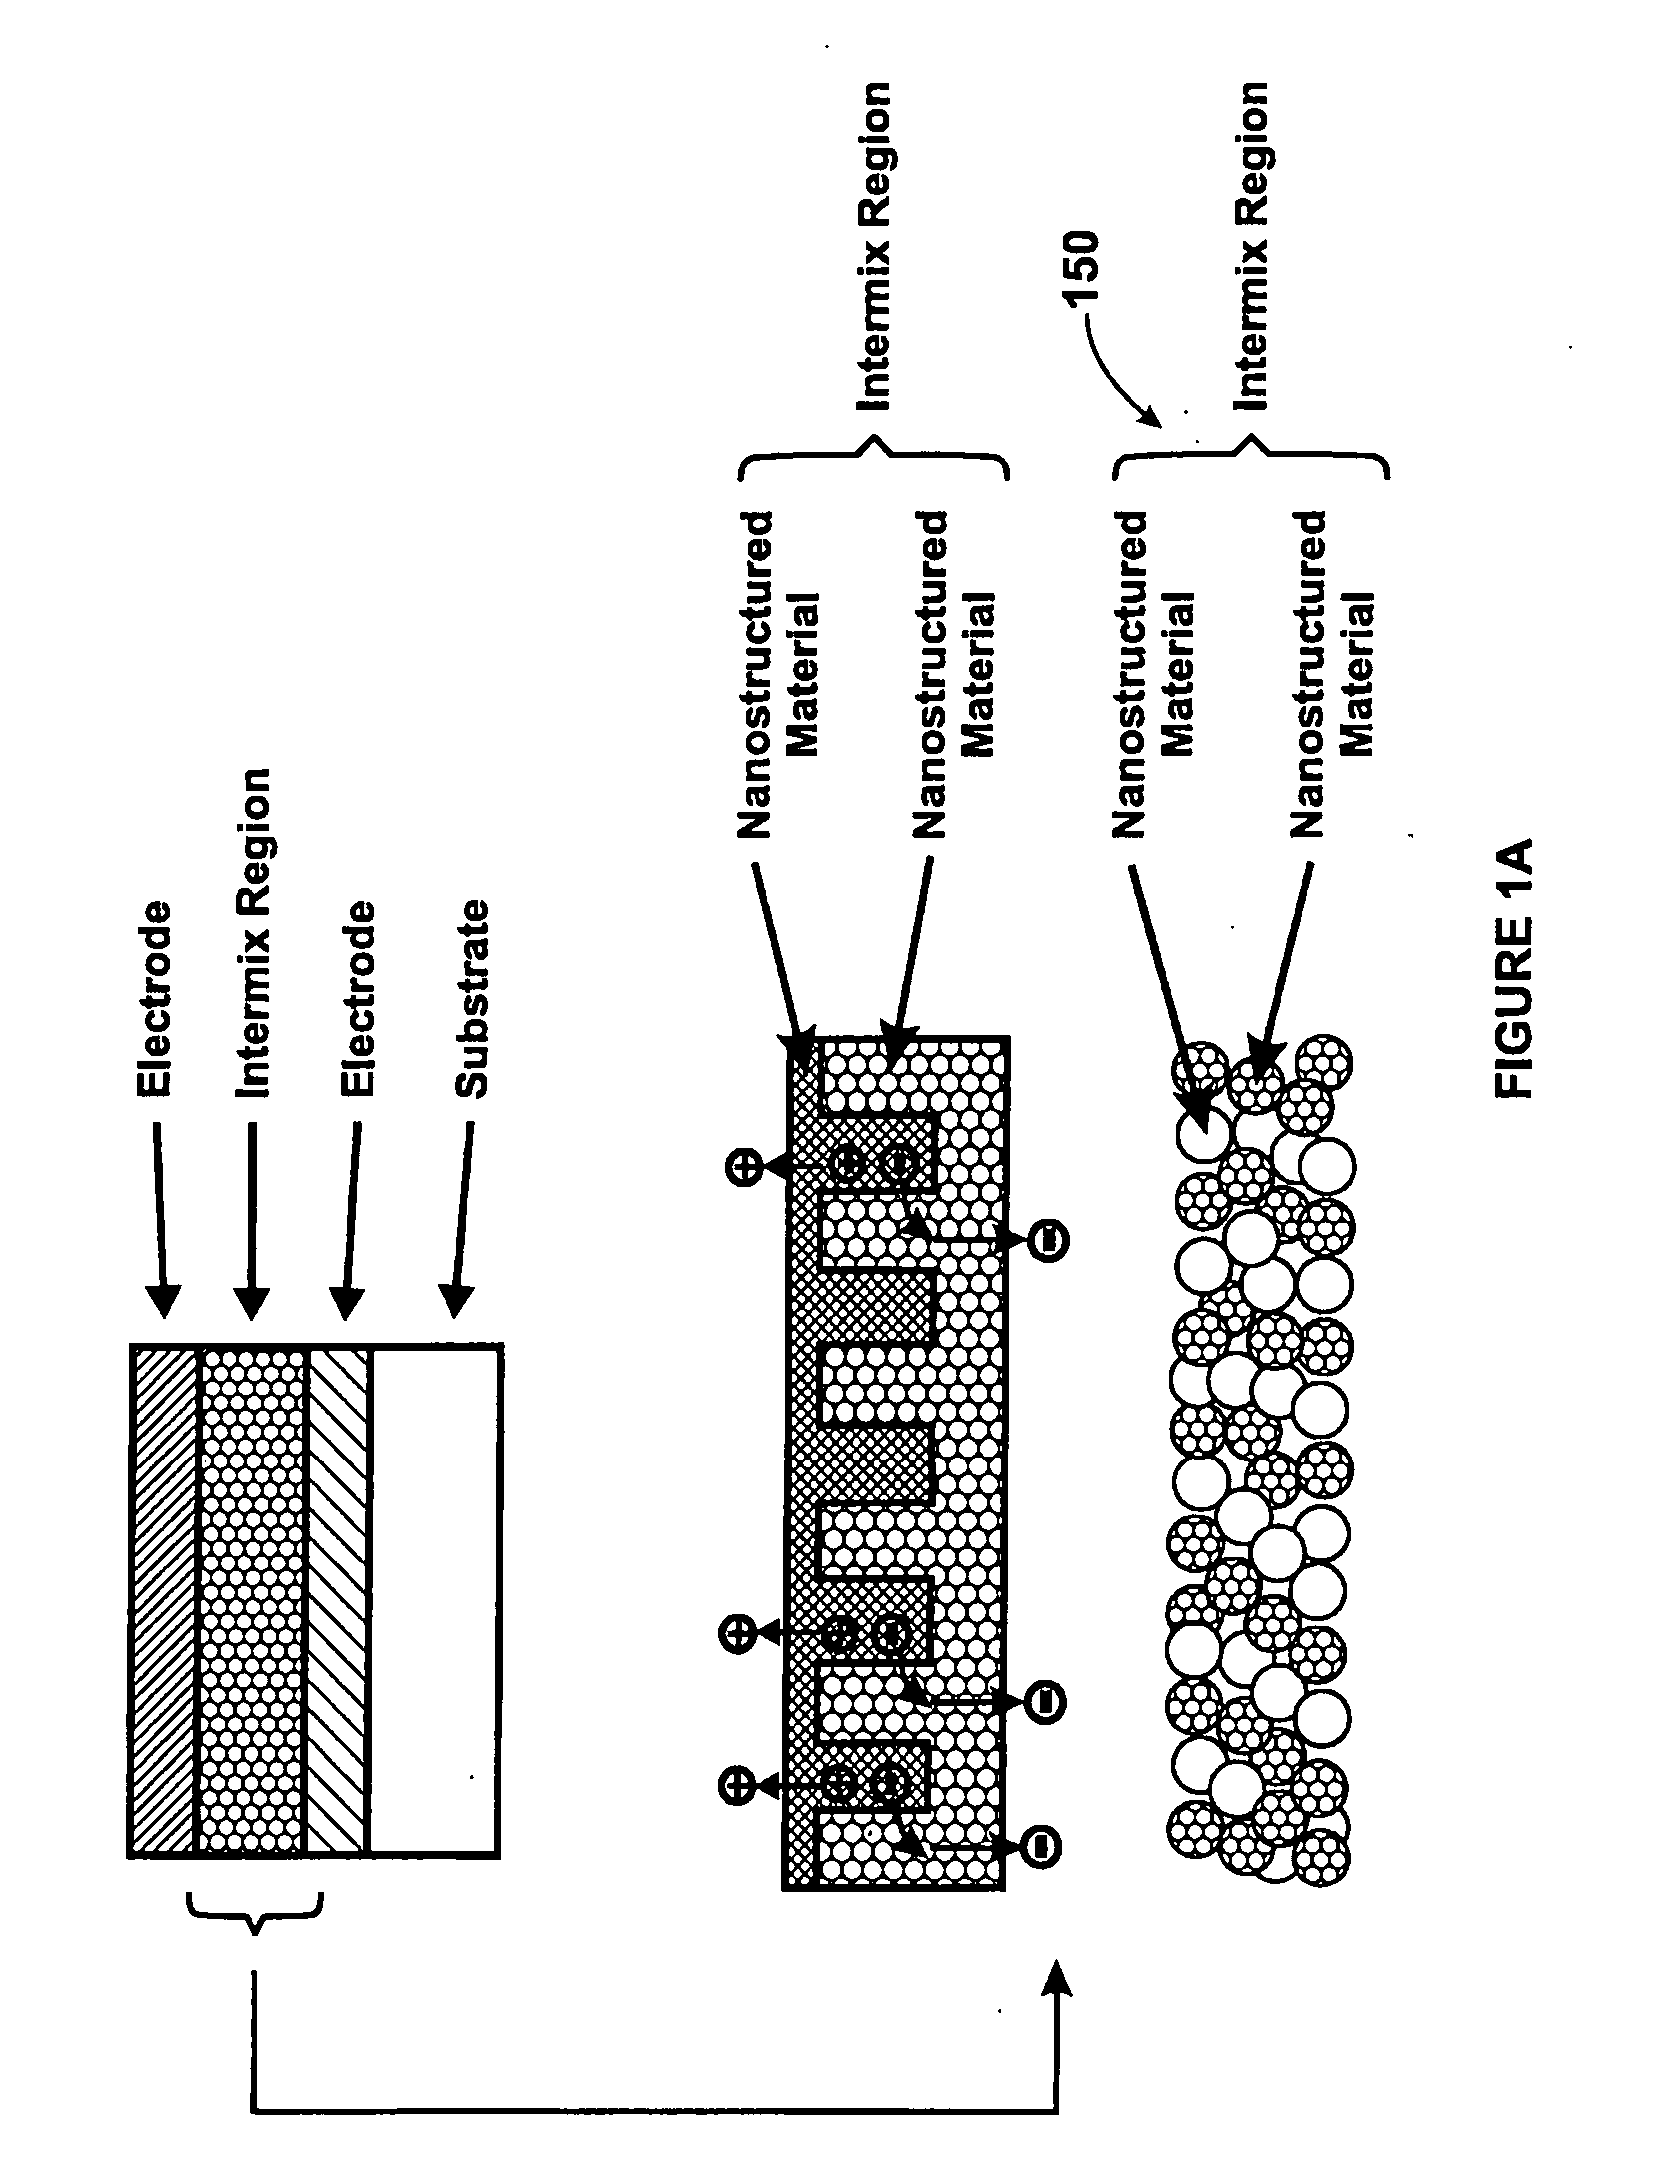 Method and structure for thin film photovoltaic materials using bulk semiconductor materials